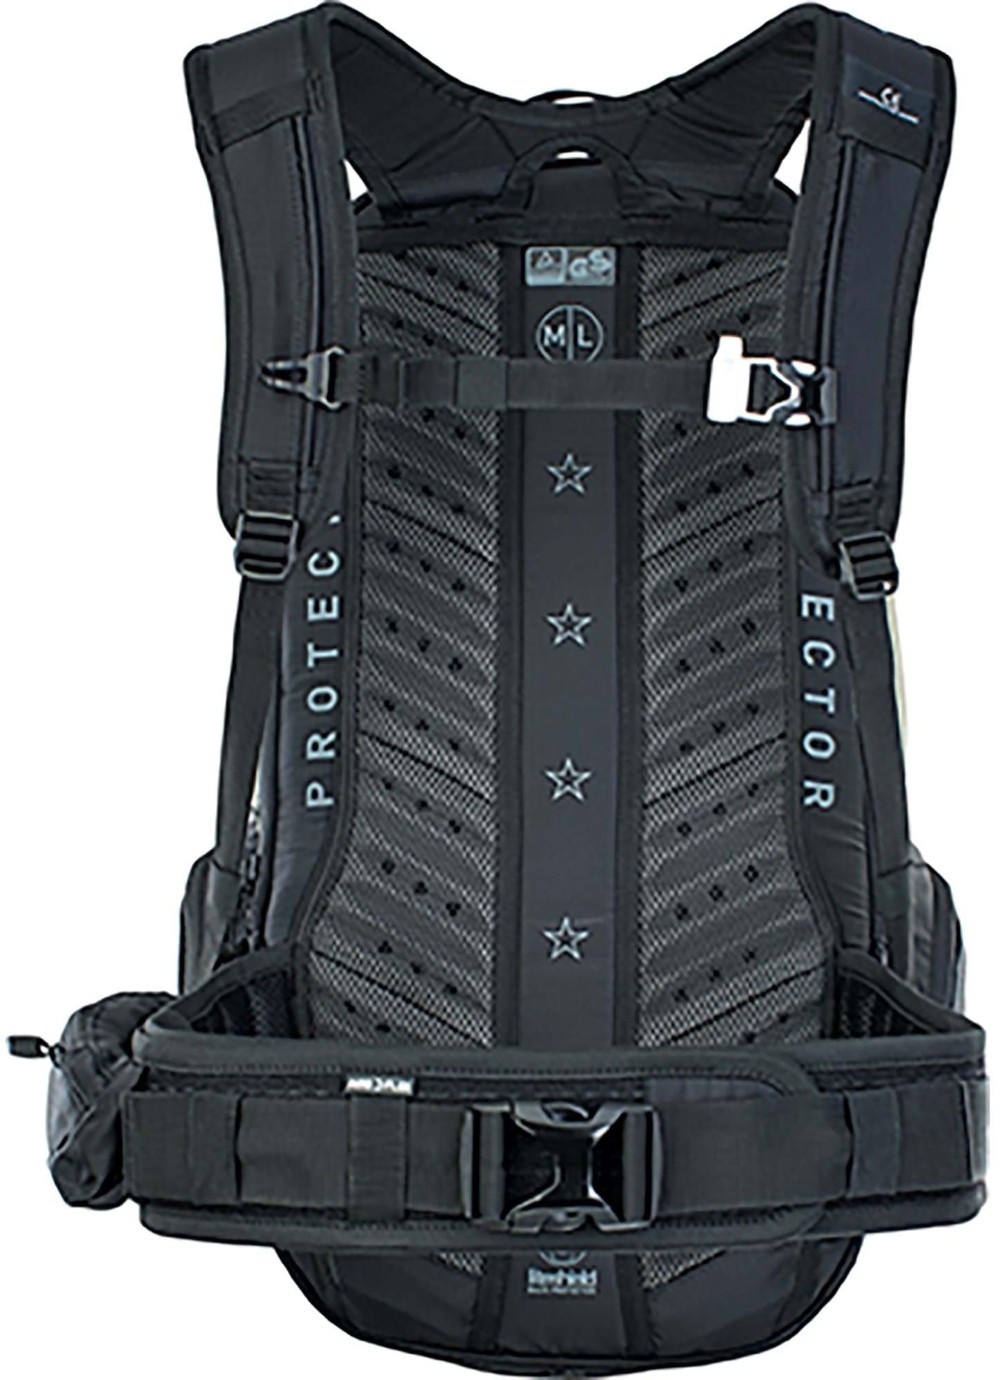 FR Tour E-Ride 30L Protector Backpack image 1